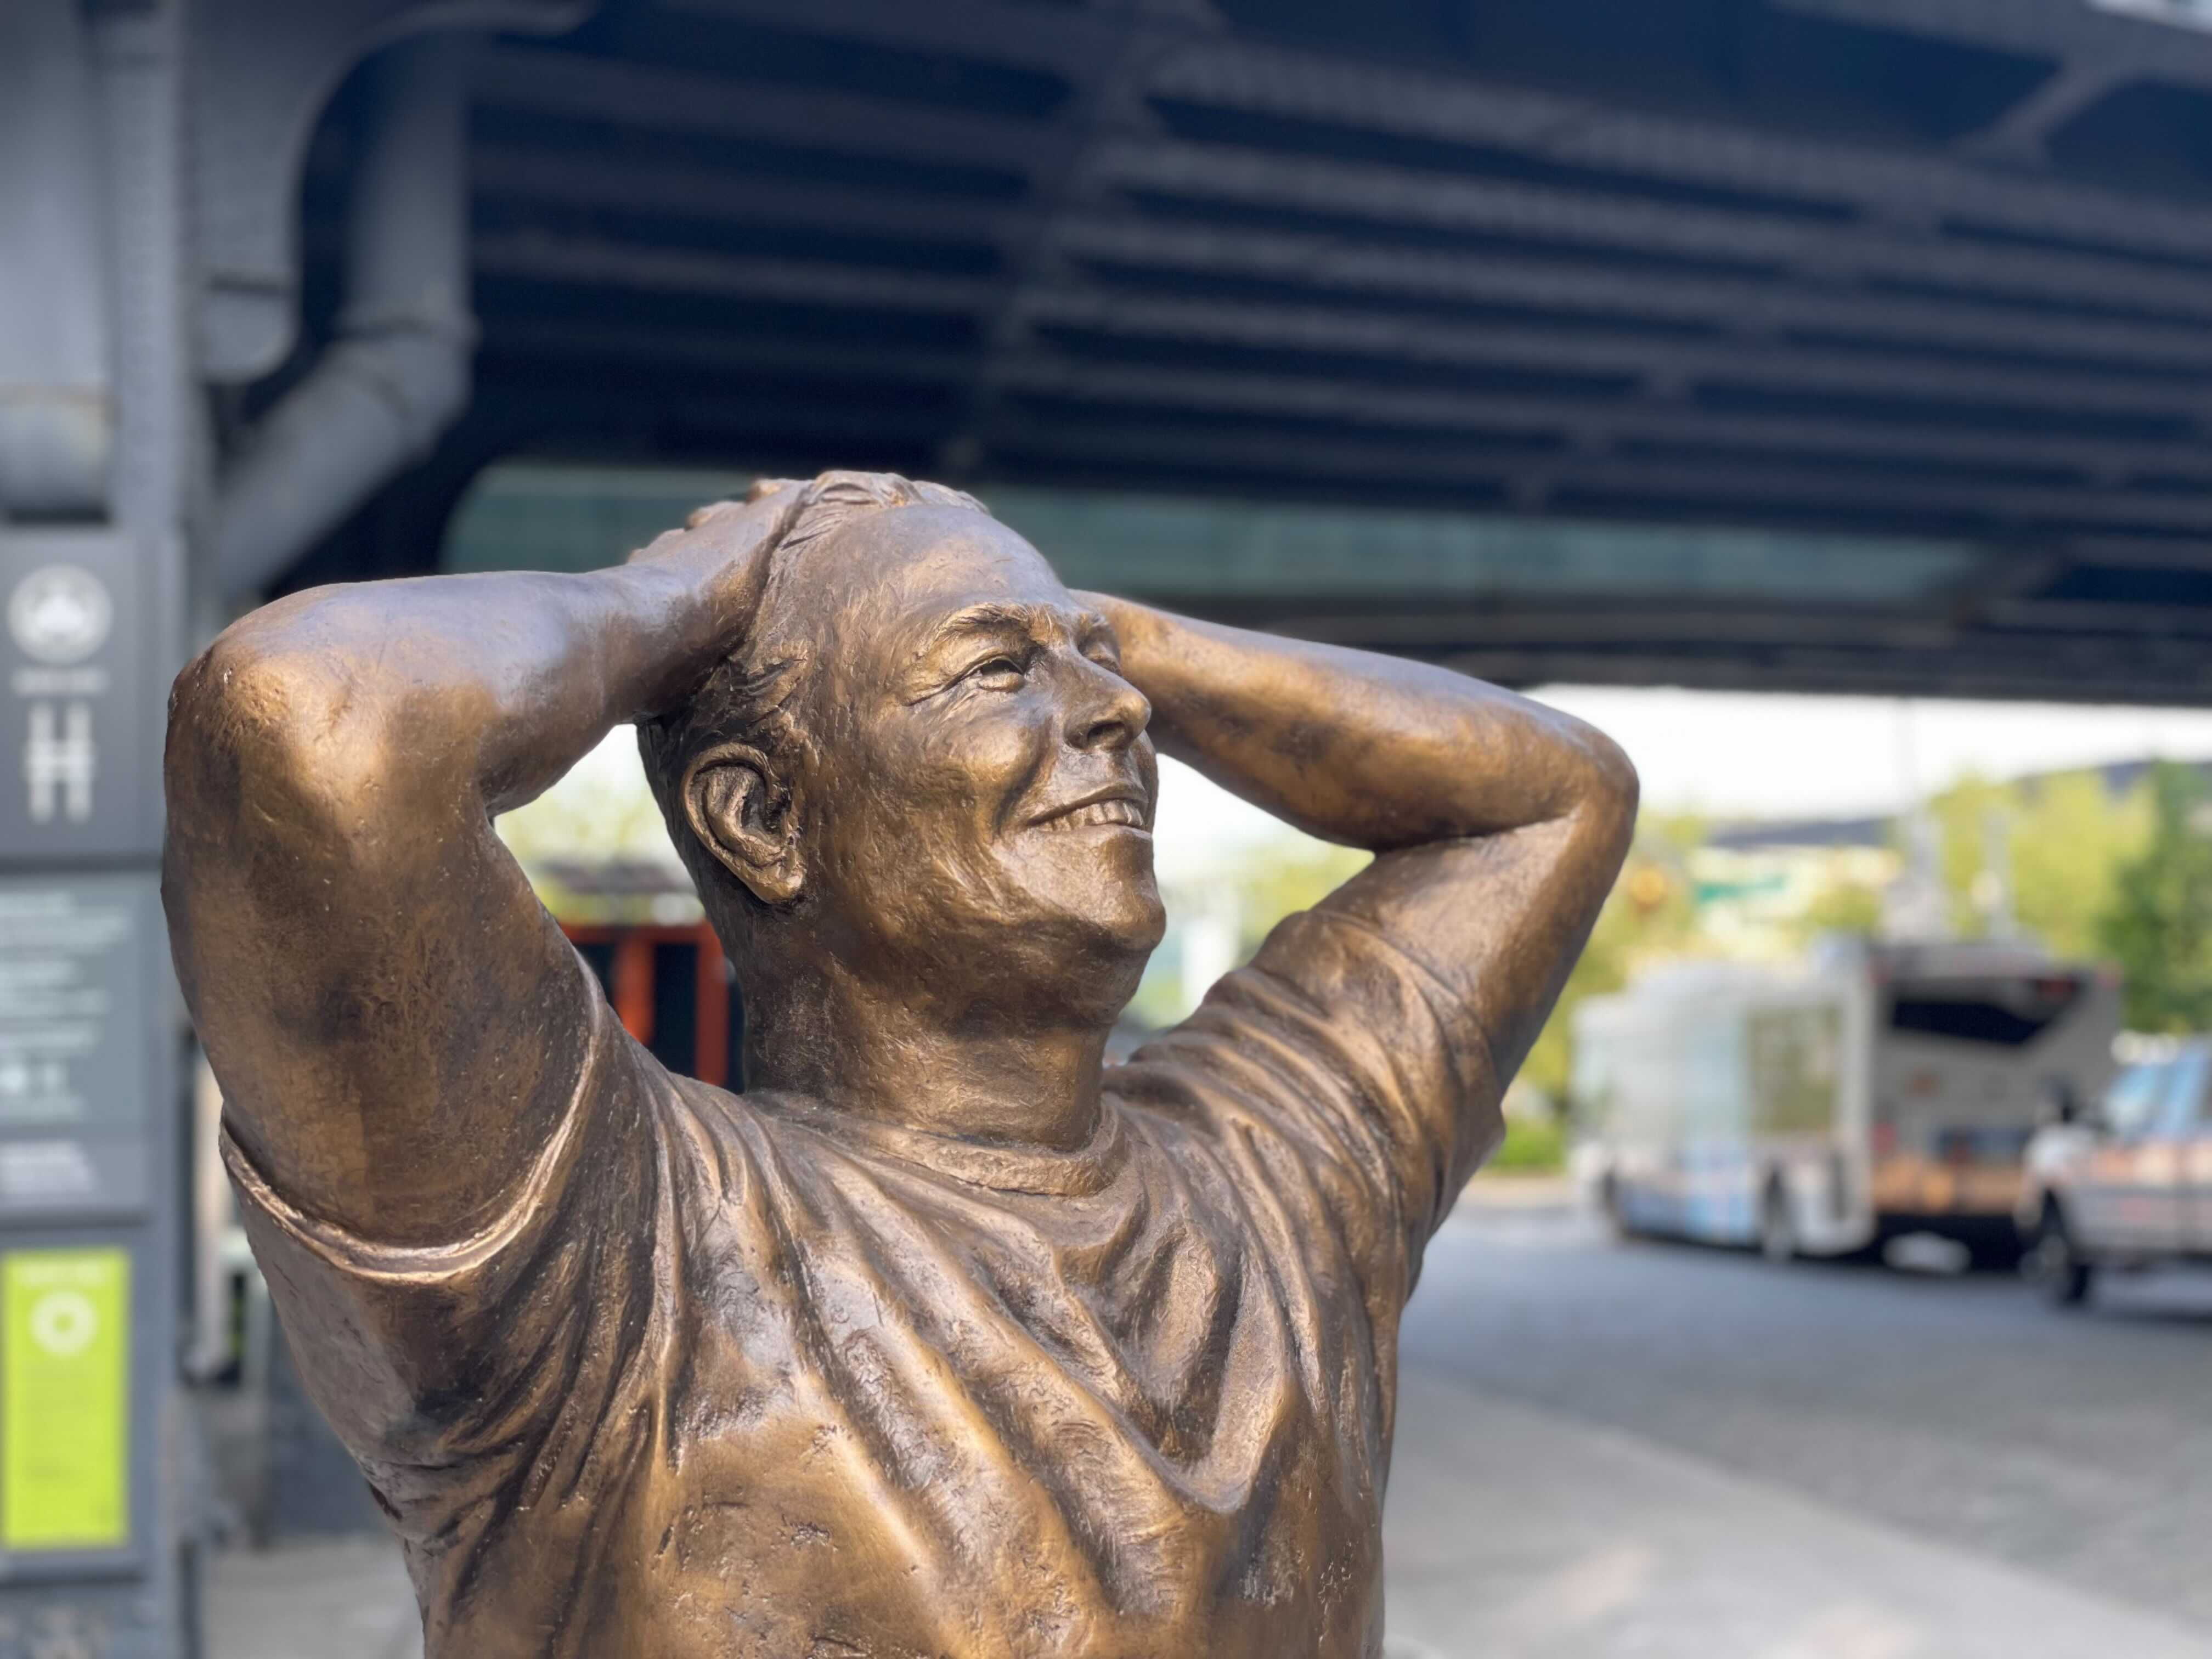 There’s a 6-foot Elon Musk statue in New York and one ‘lucky’ person has the chance of taking it home